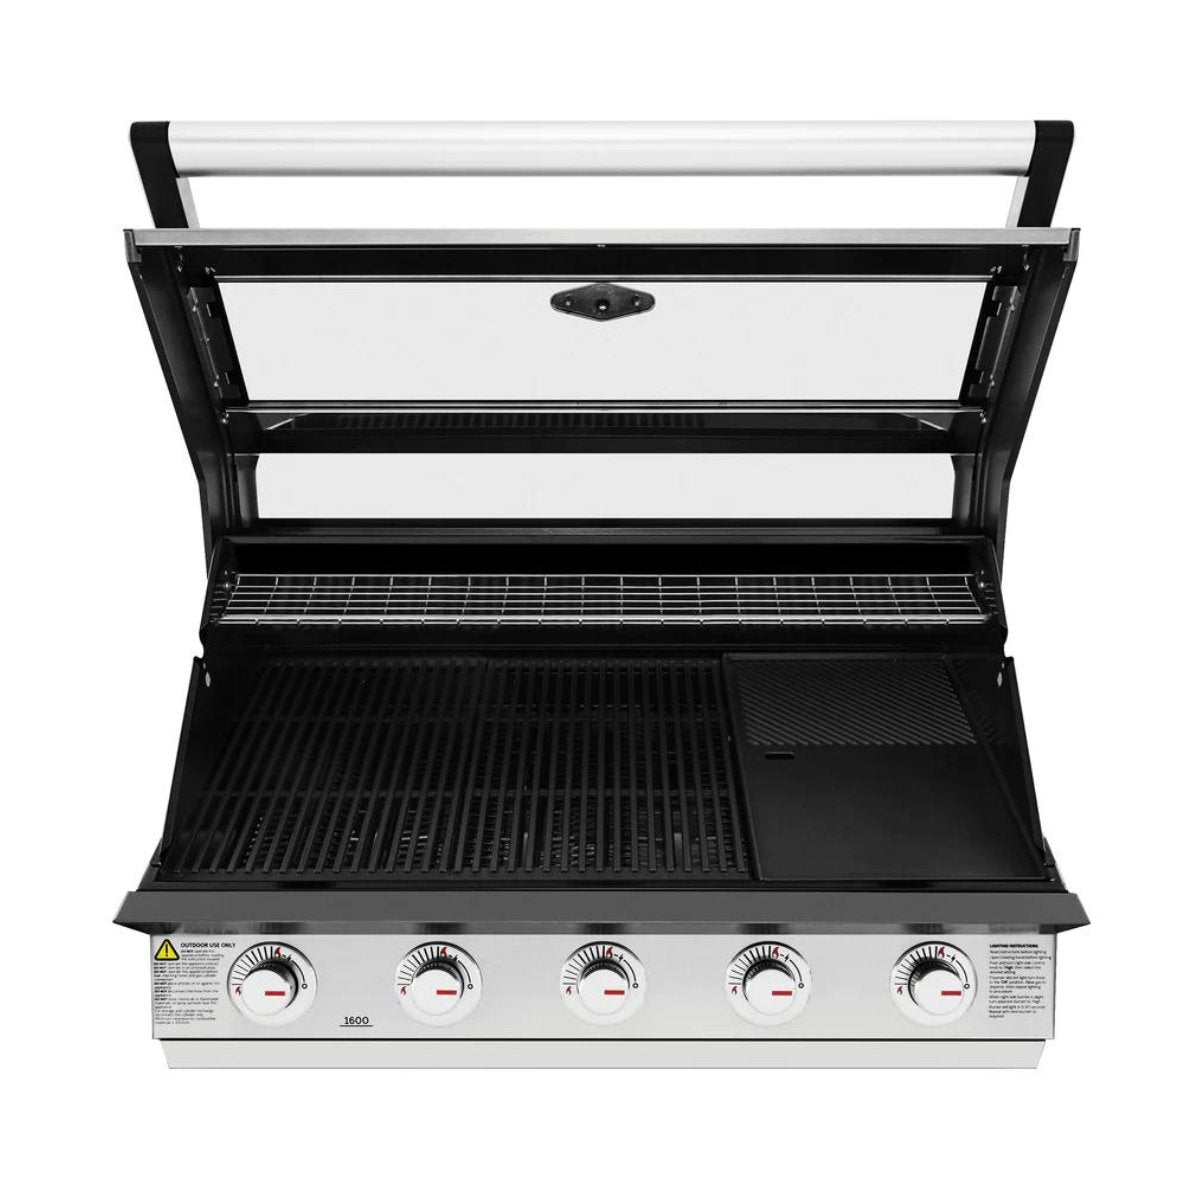 Beefeater 1600S 5 Burner Built-In Grill - Kitchen In The Garden